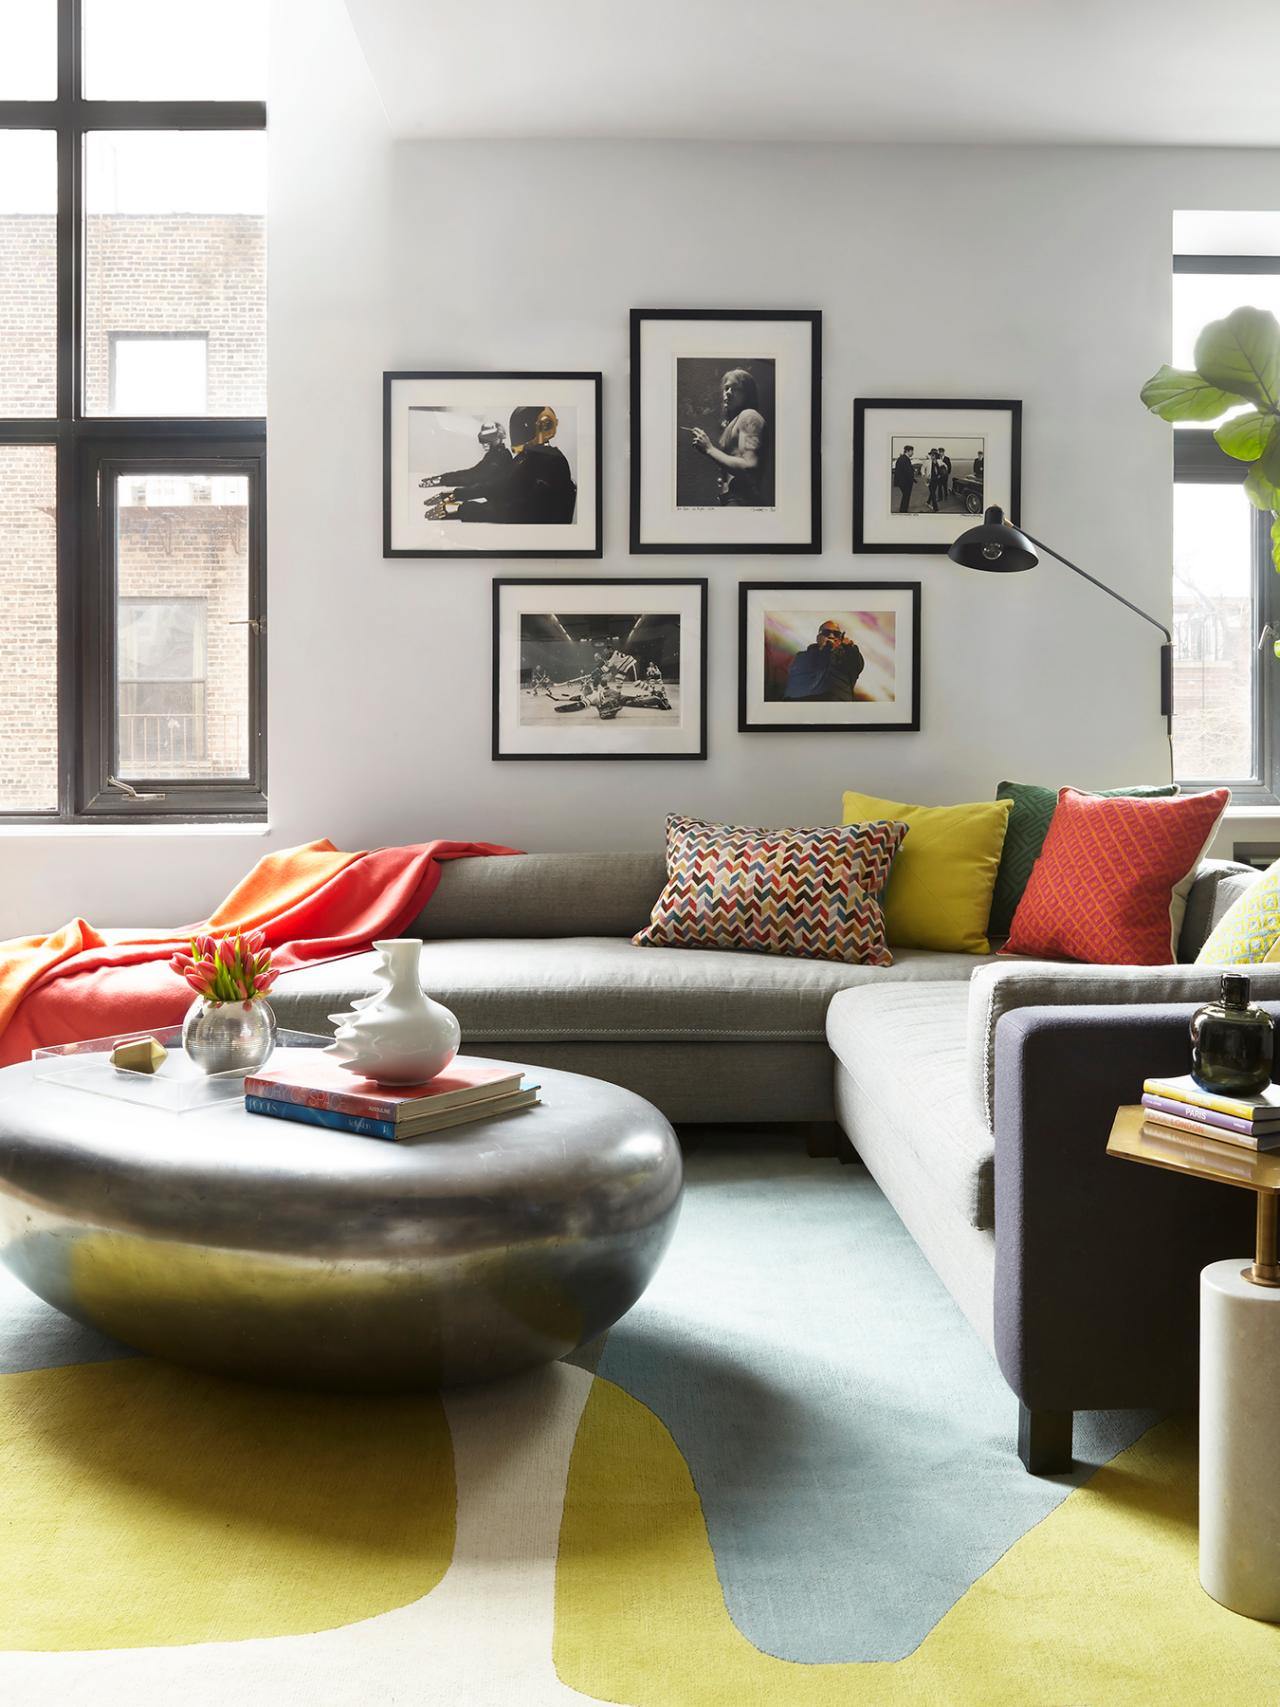 12 Living Room Ideas for a Grey Sectional | HGTV's ...